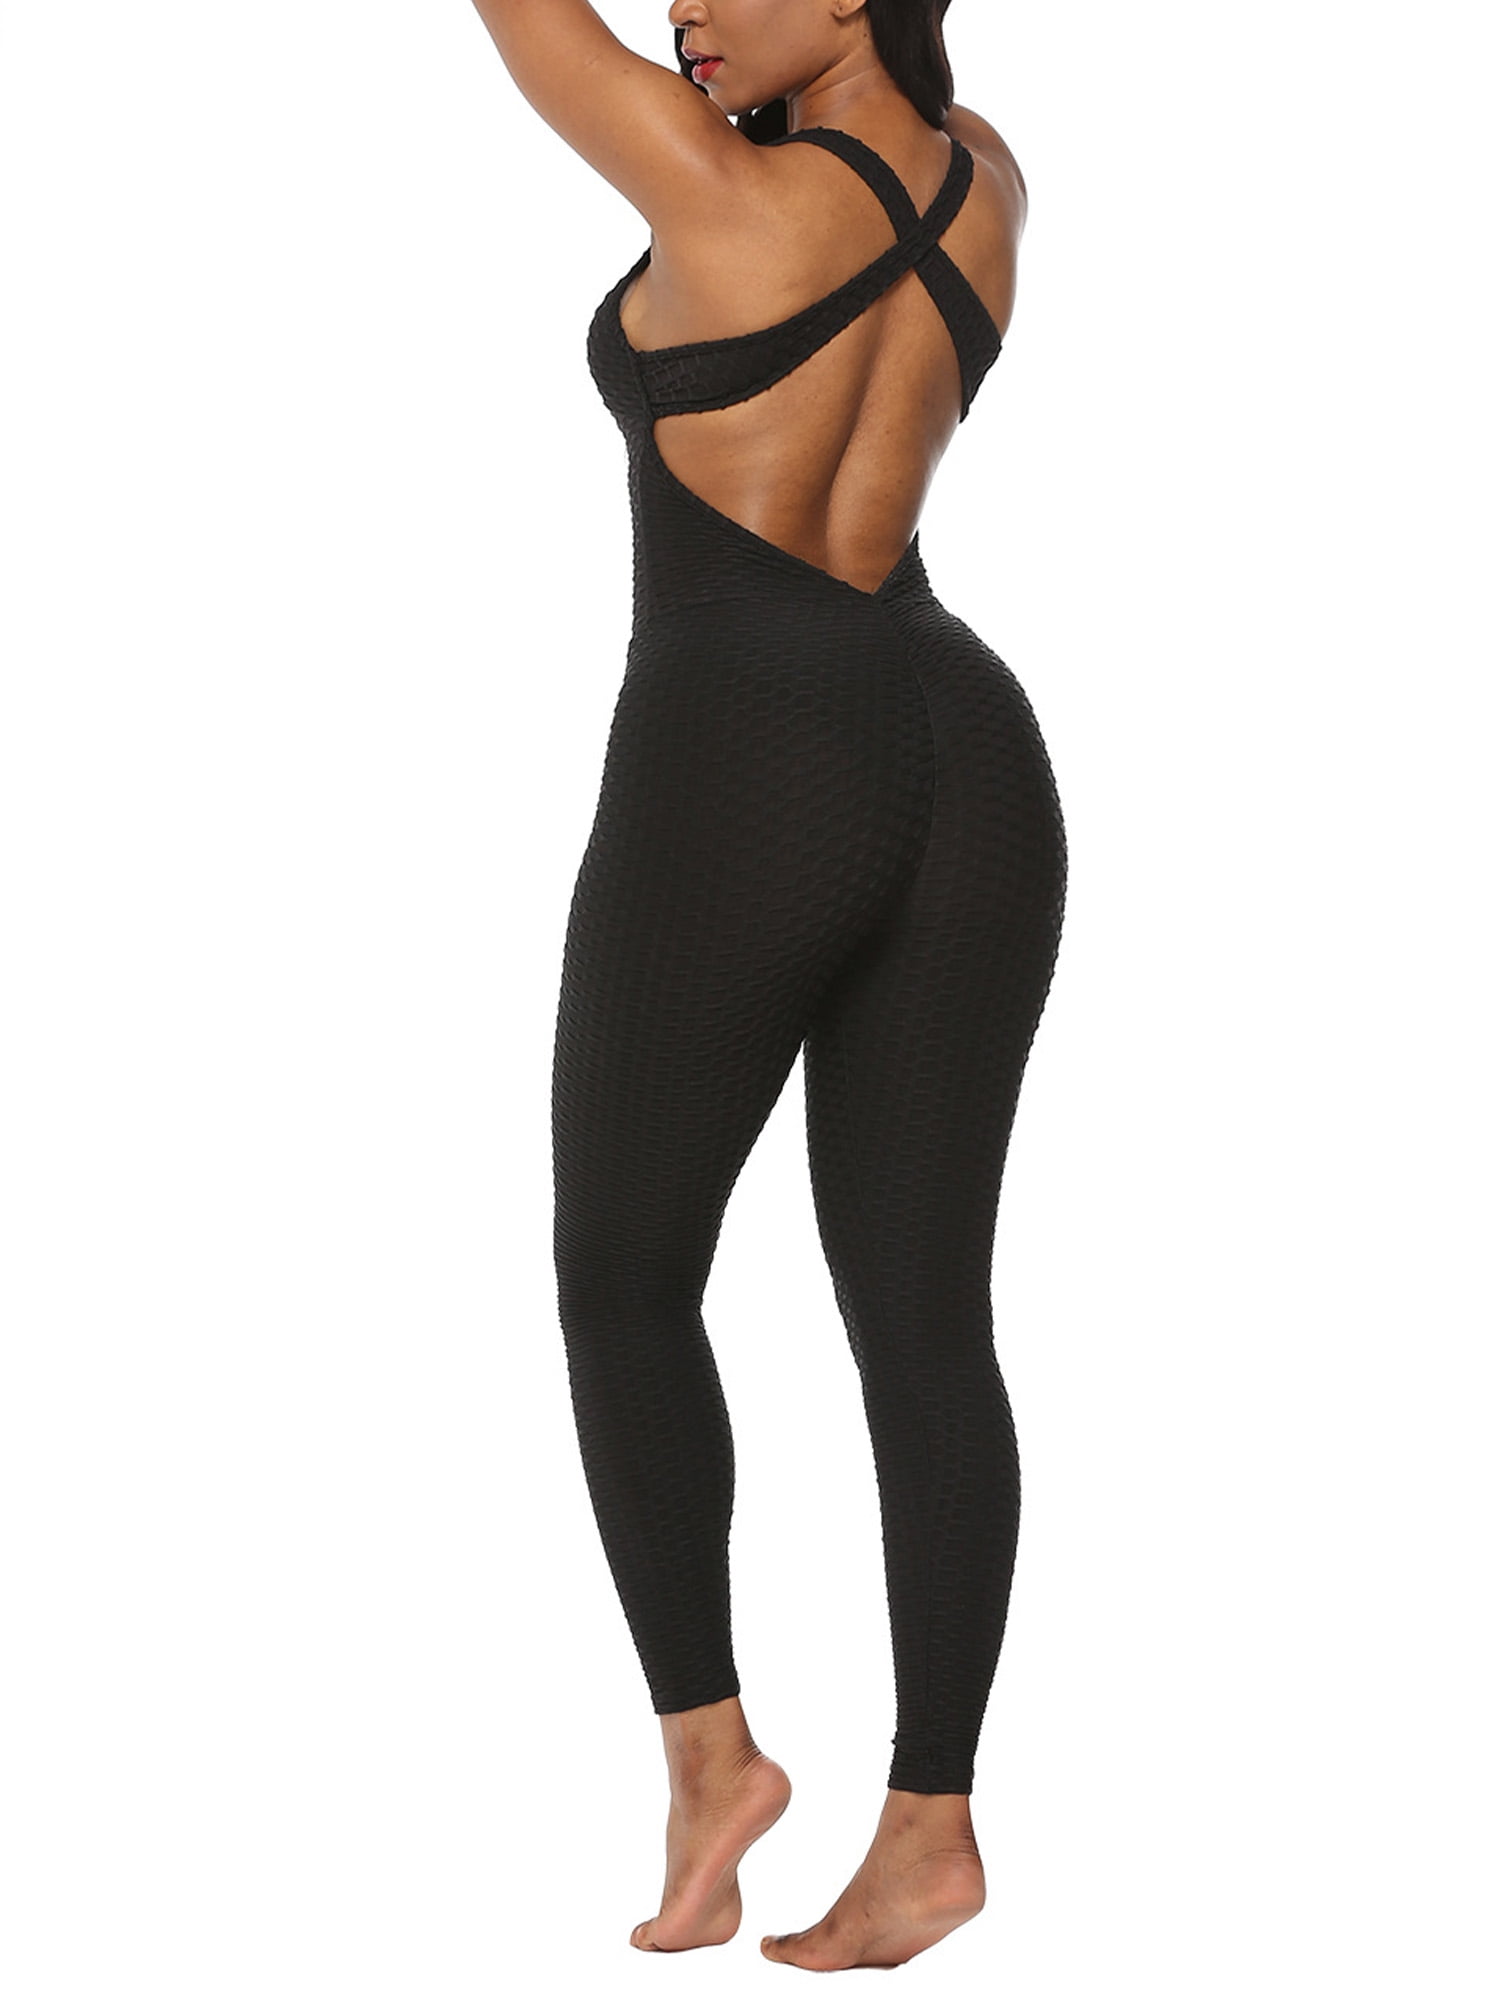 Black Bodysuit Workrout Jumpsuit Athletic Sportswear Women Activewear  Shaping Playsuit One Piece Catsuit Slim Fitness Training Gym -  Canada